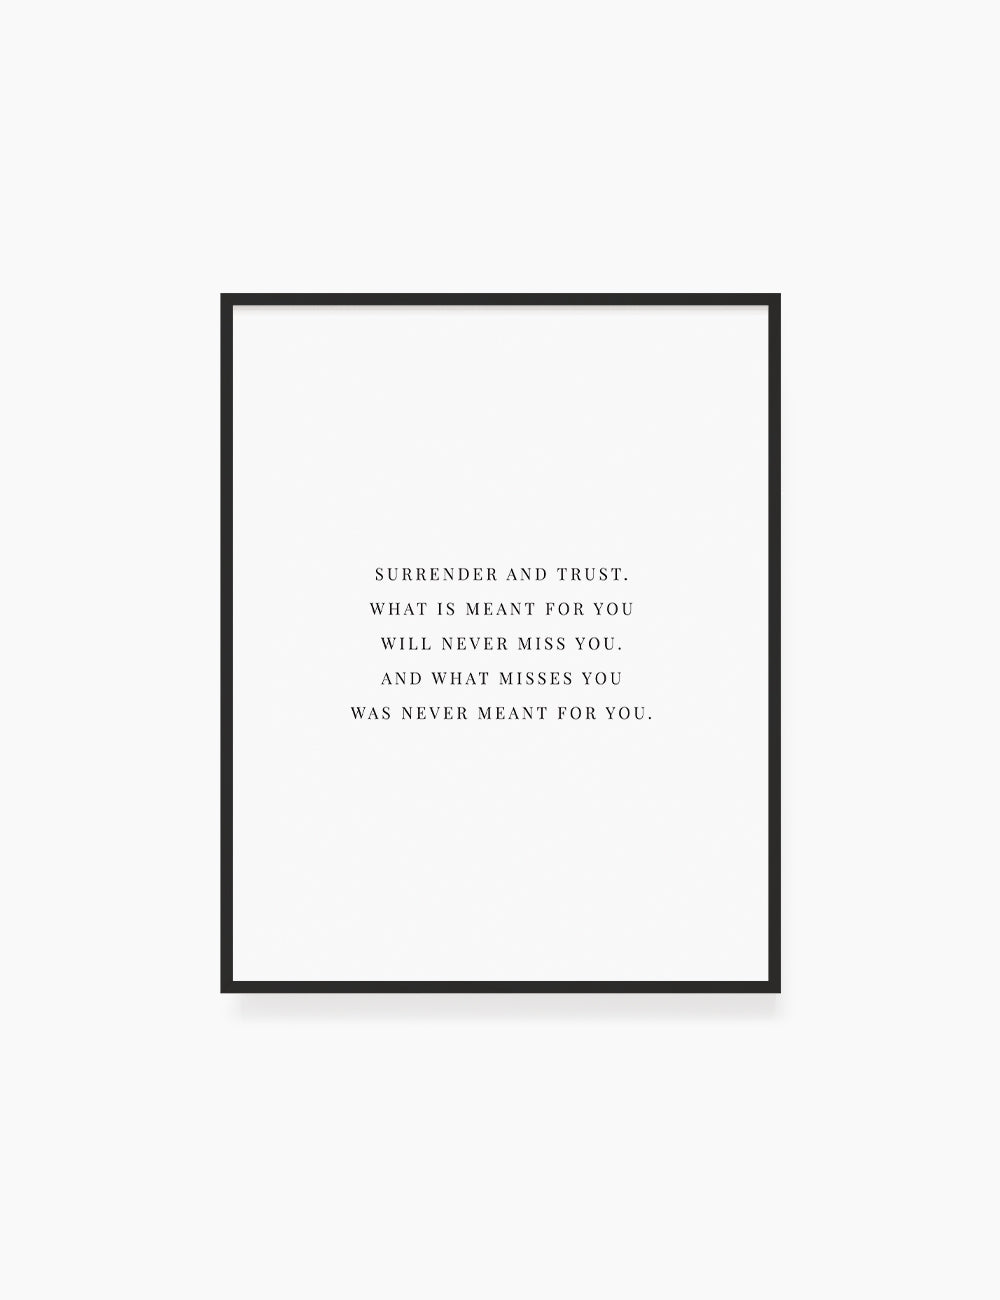 Motivational Quotes Wall Art Printable Inspirational Quote -  Portugal